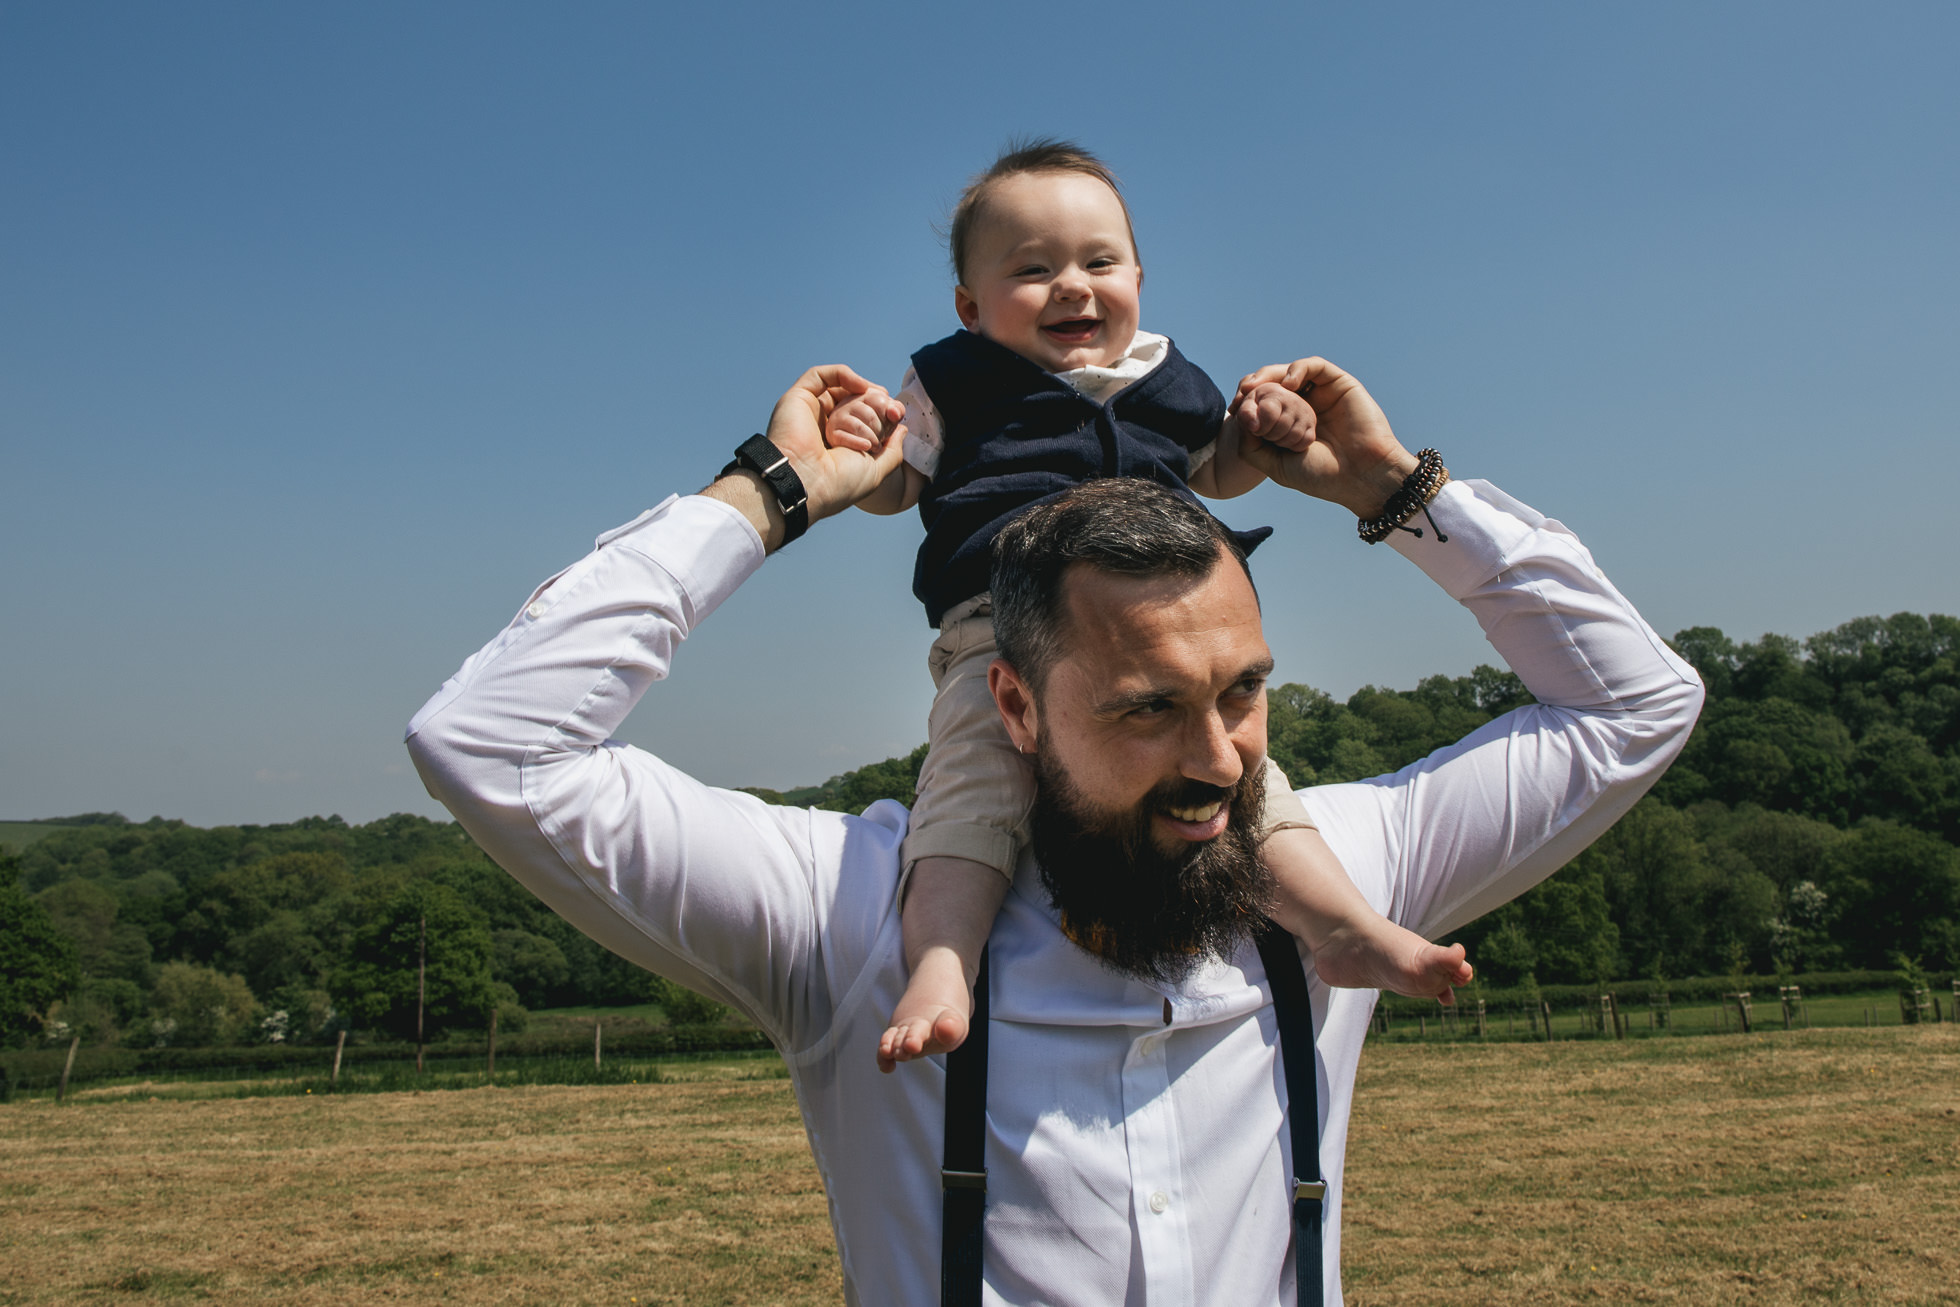 Groom with laughing baby on his shoulders